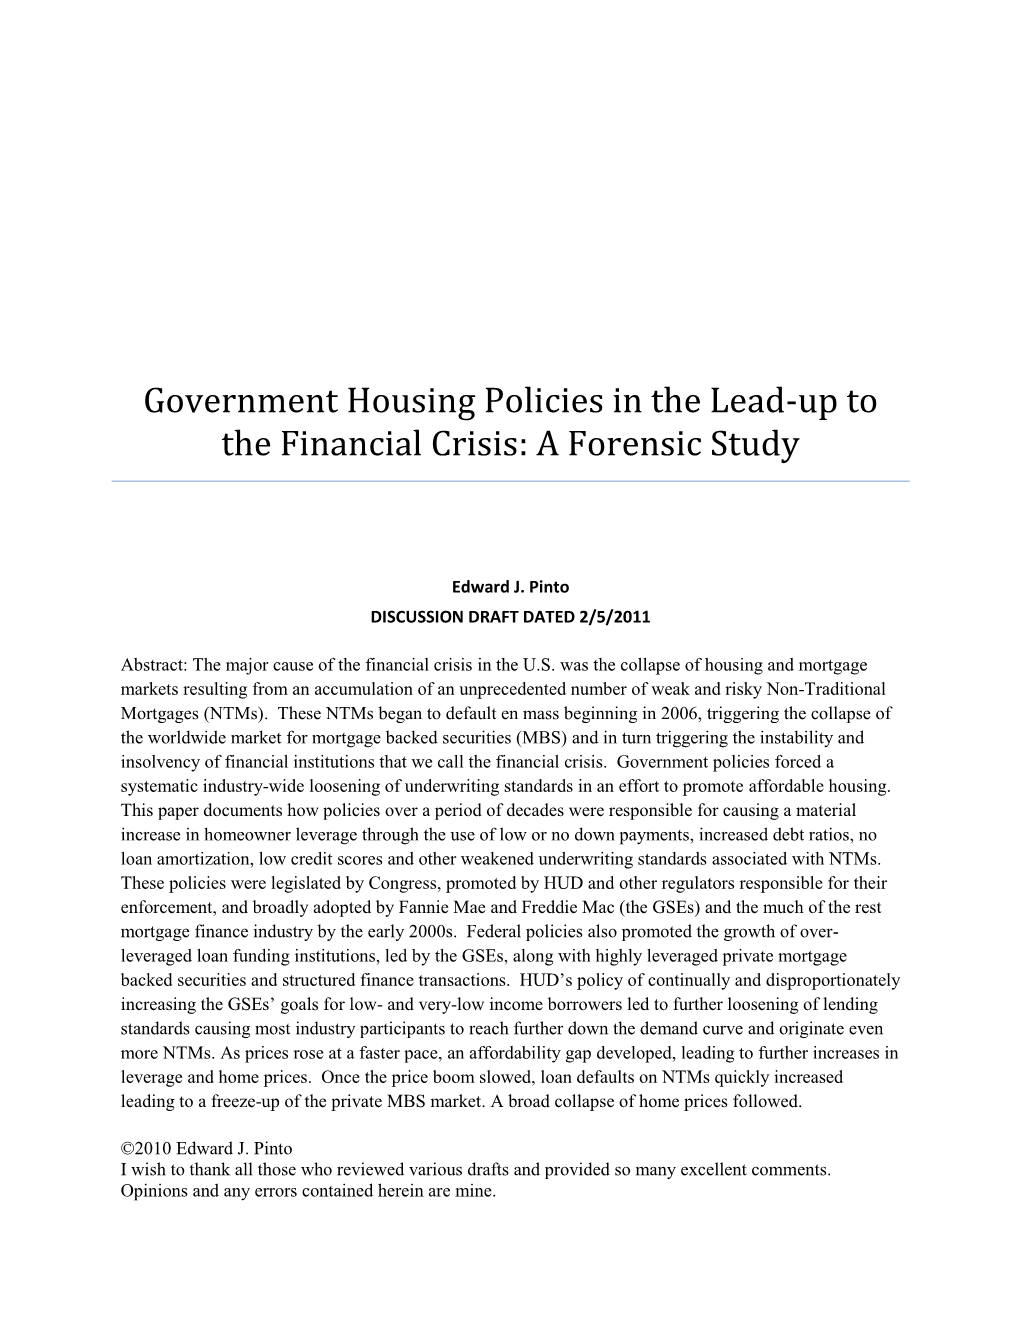 Government Housing Policies in the Lead-Up to the Financial Crisis: a Forensic Study